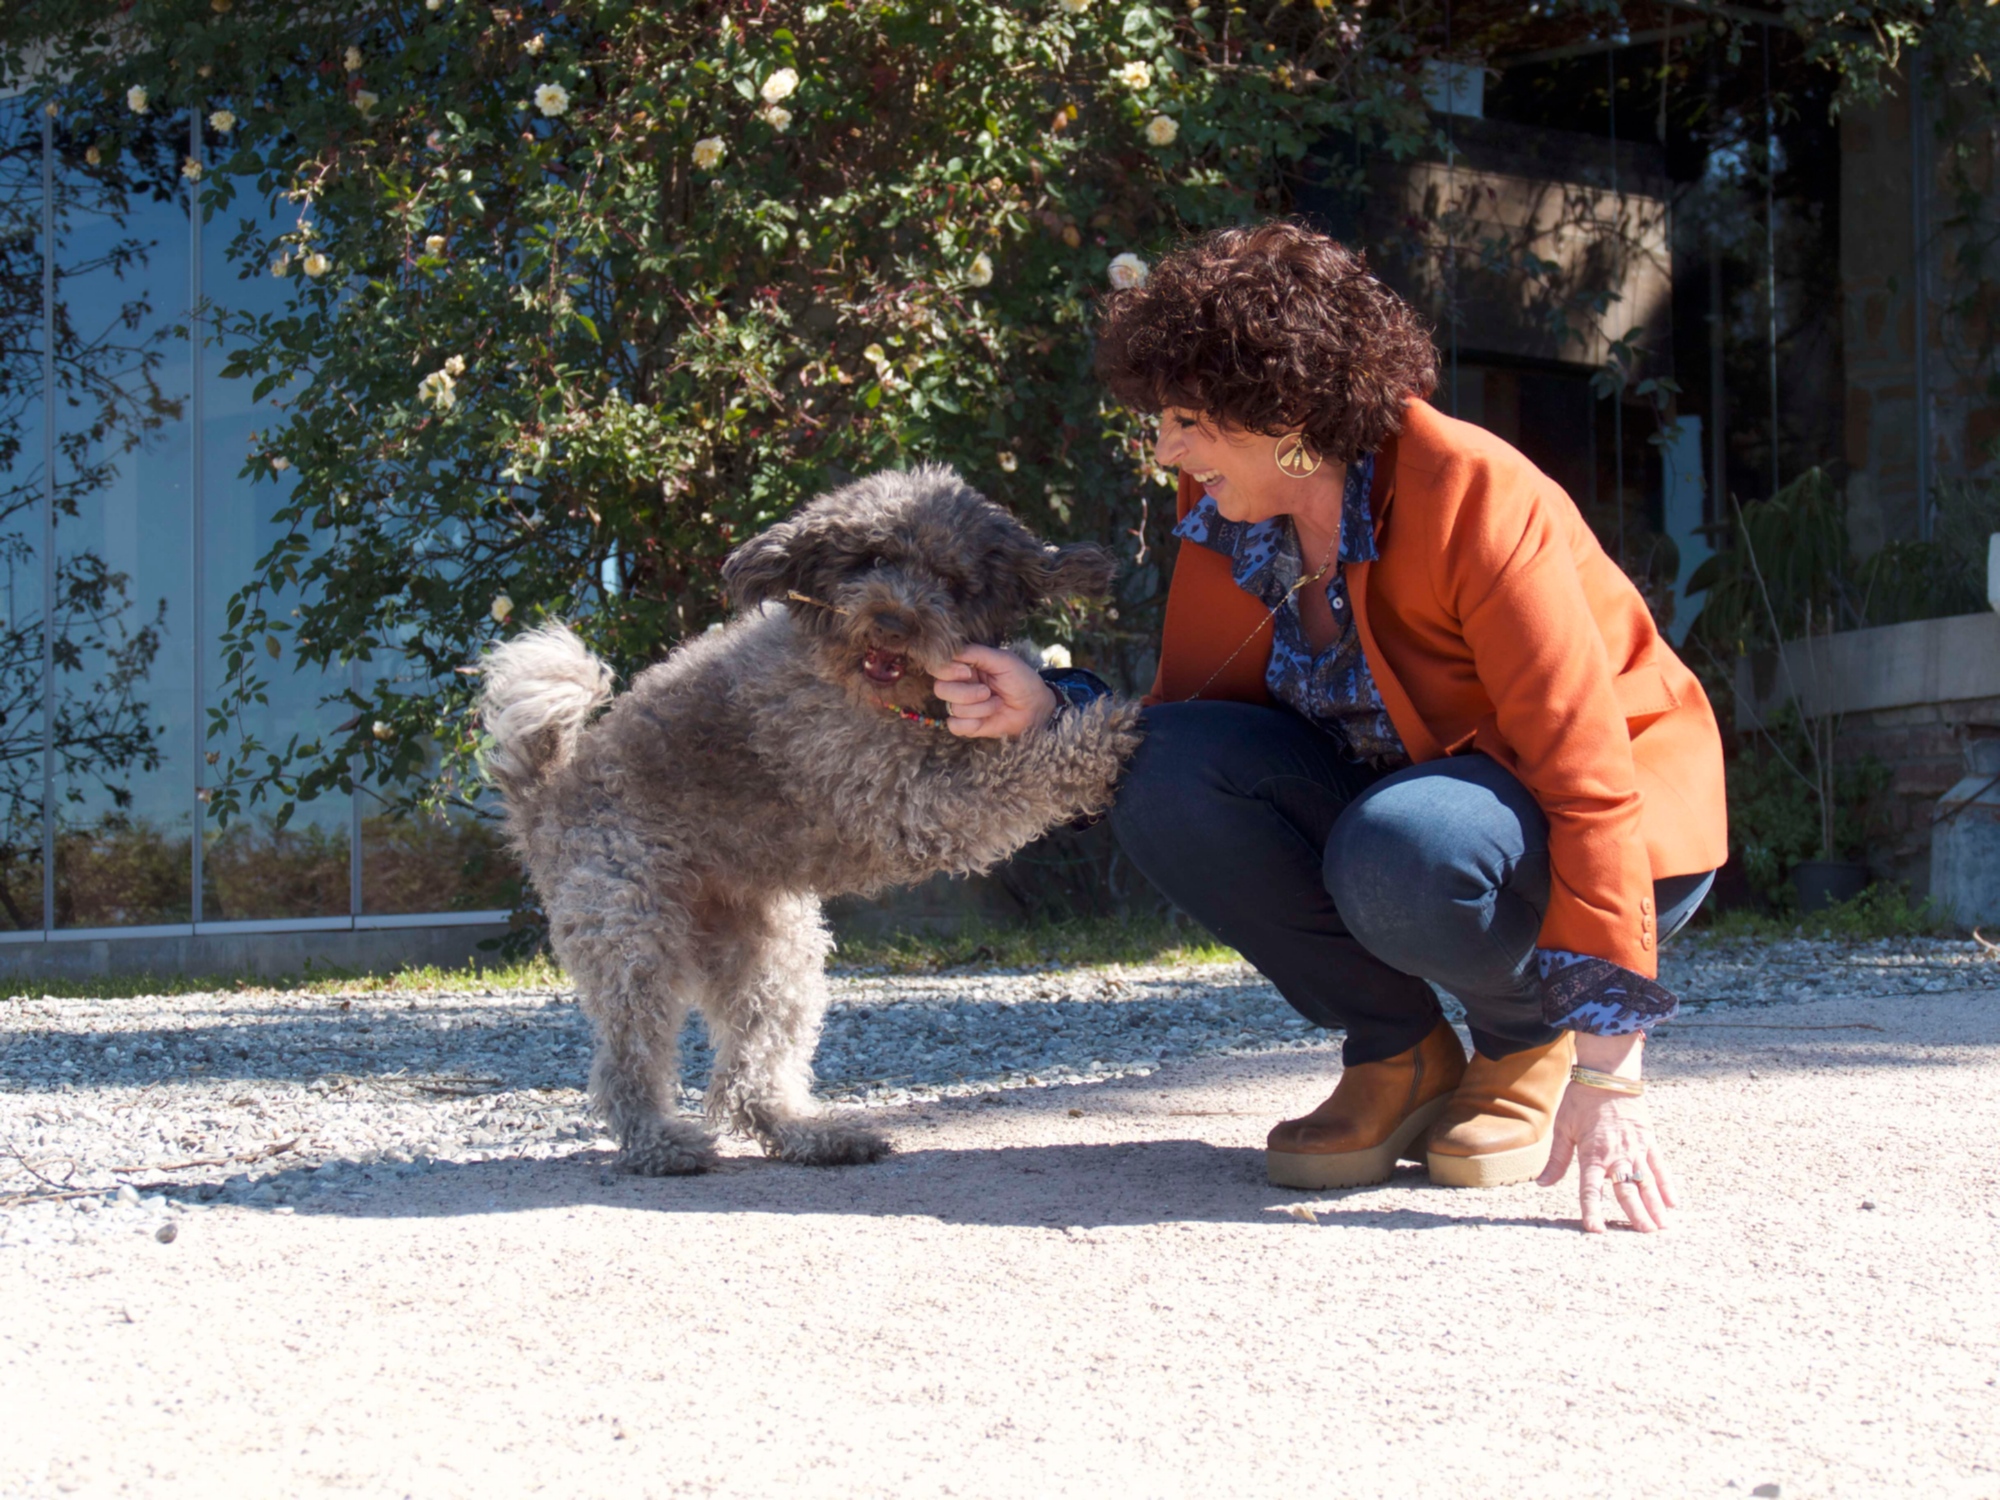 Three days in Maremma in exclusive suites with your four-legged friend